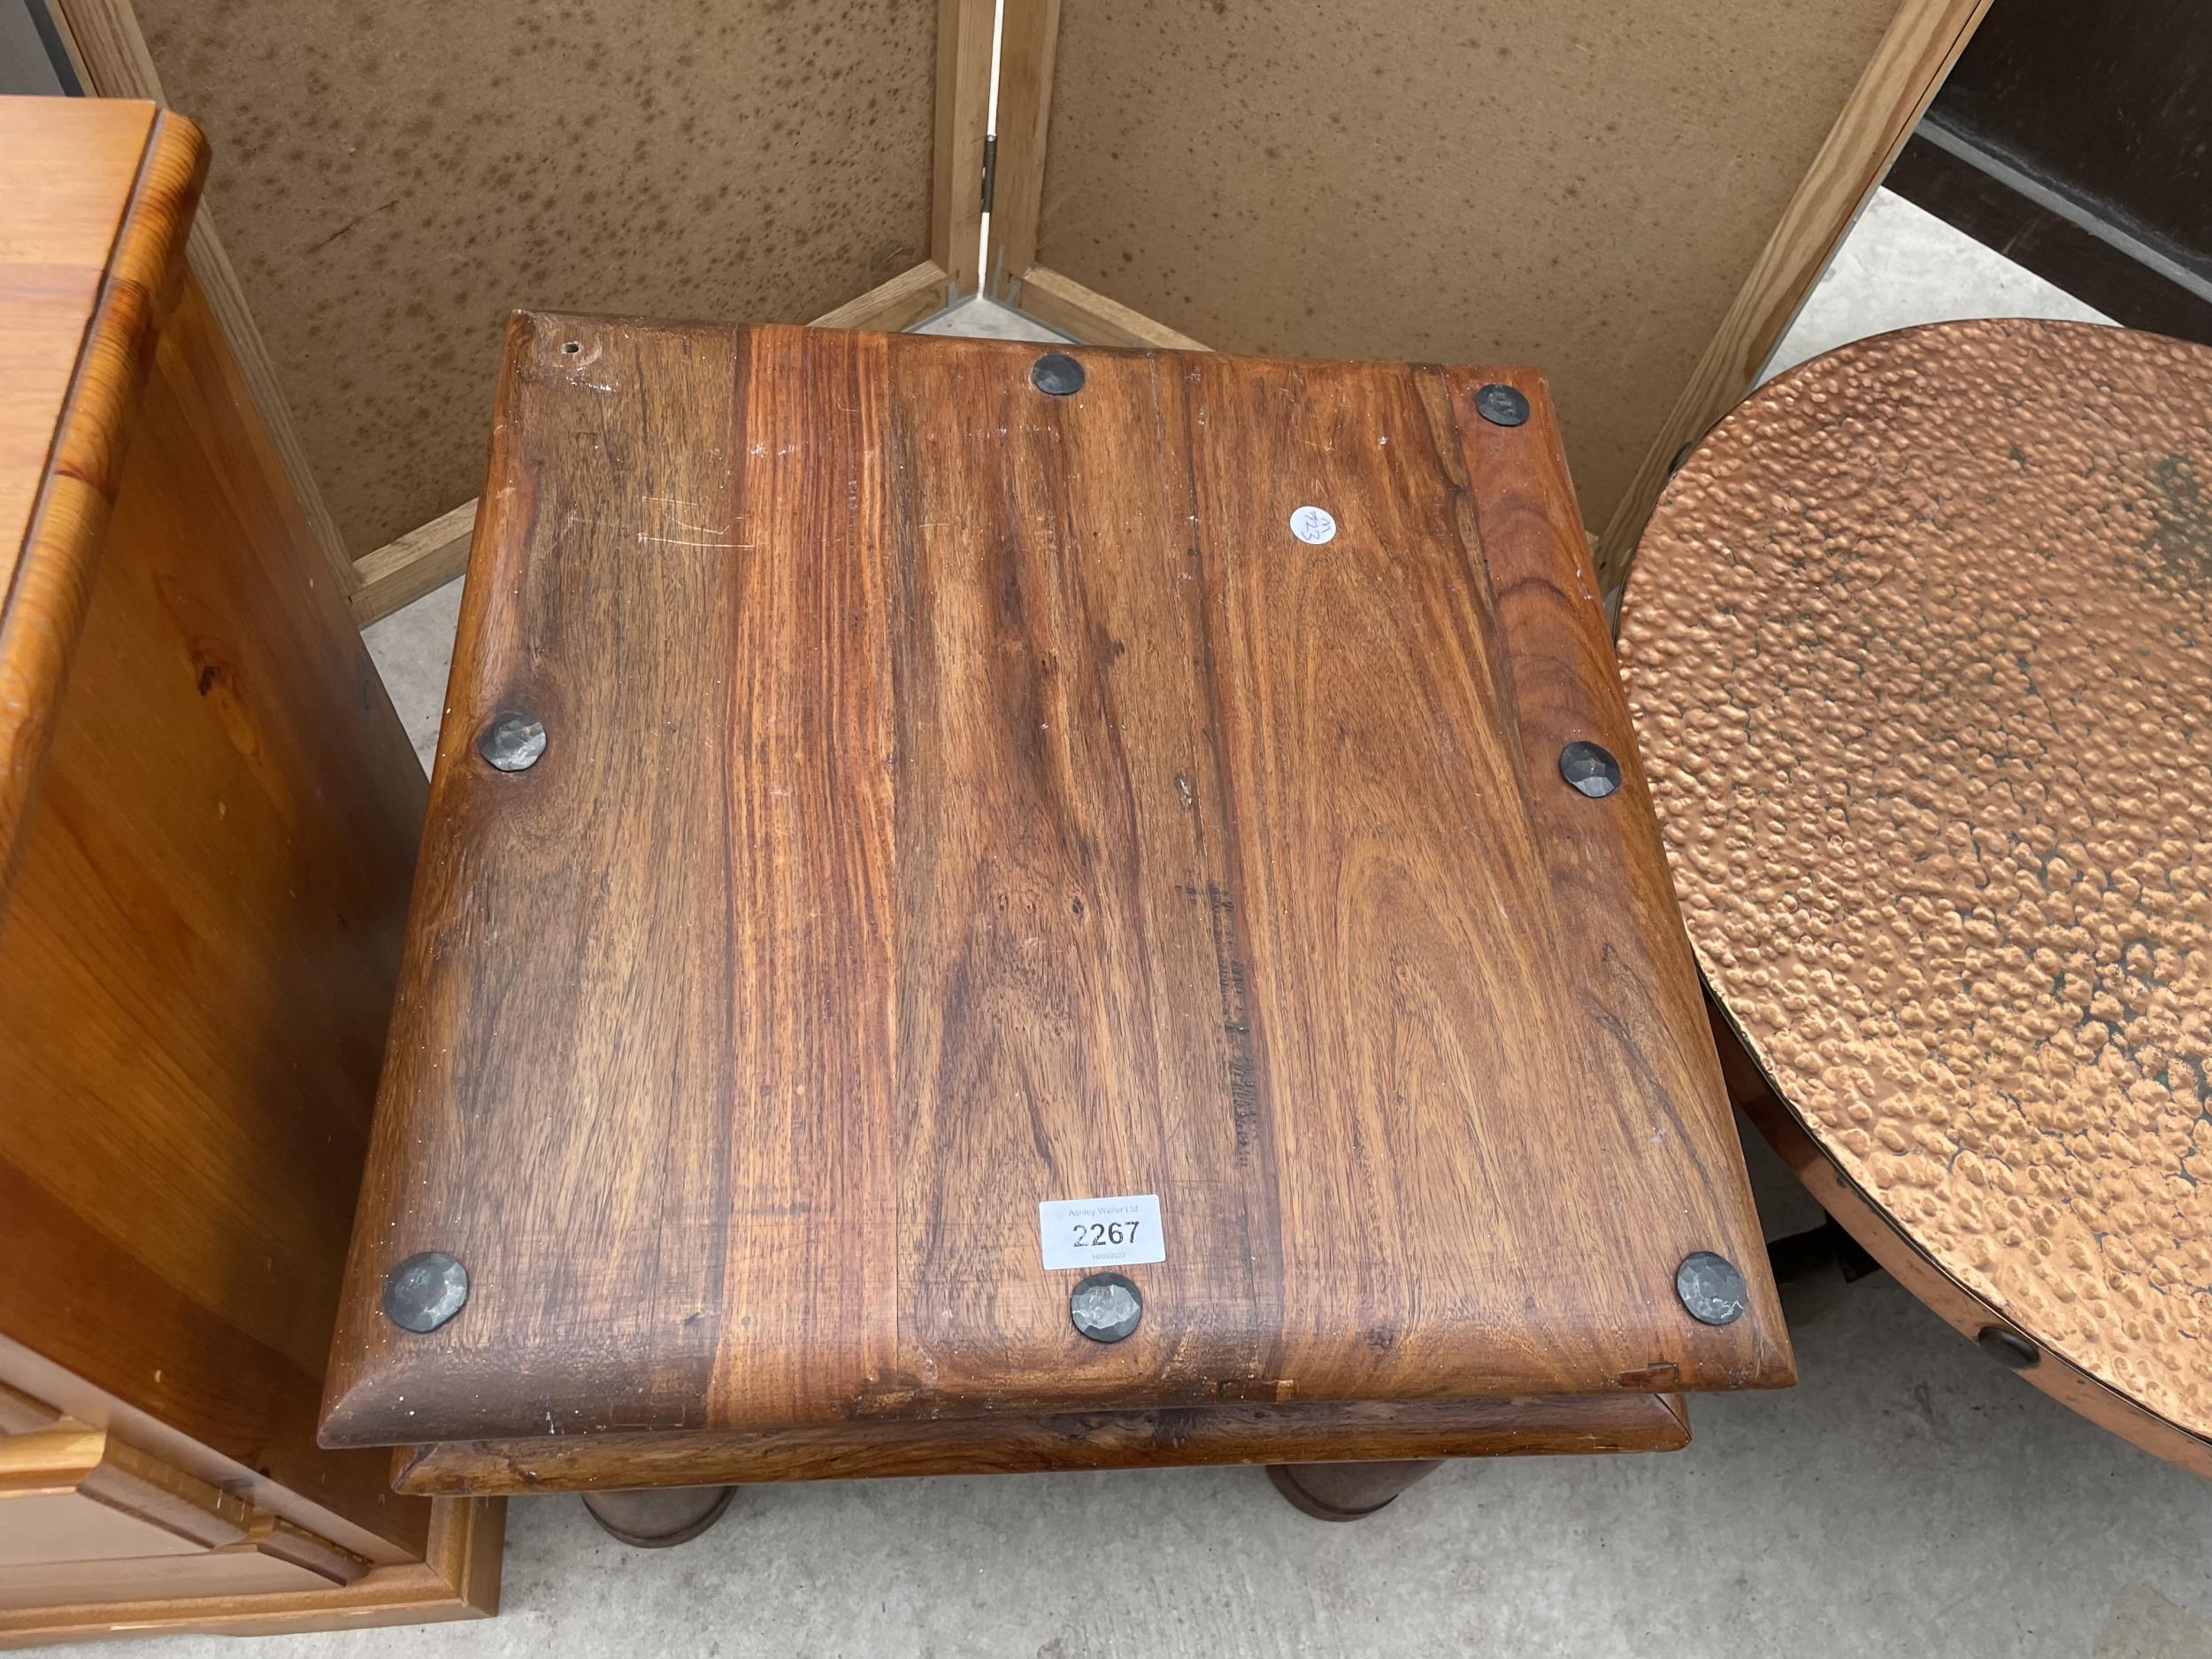 A MODERN INDIAN HARDWOOD LAMP TABLE WITH IRON WORK STUDS AND SUPPORTS, 18" SQUARE - Image 2 of 3